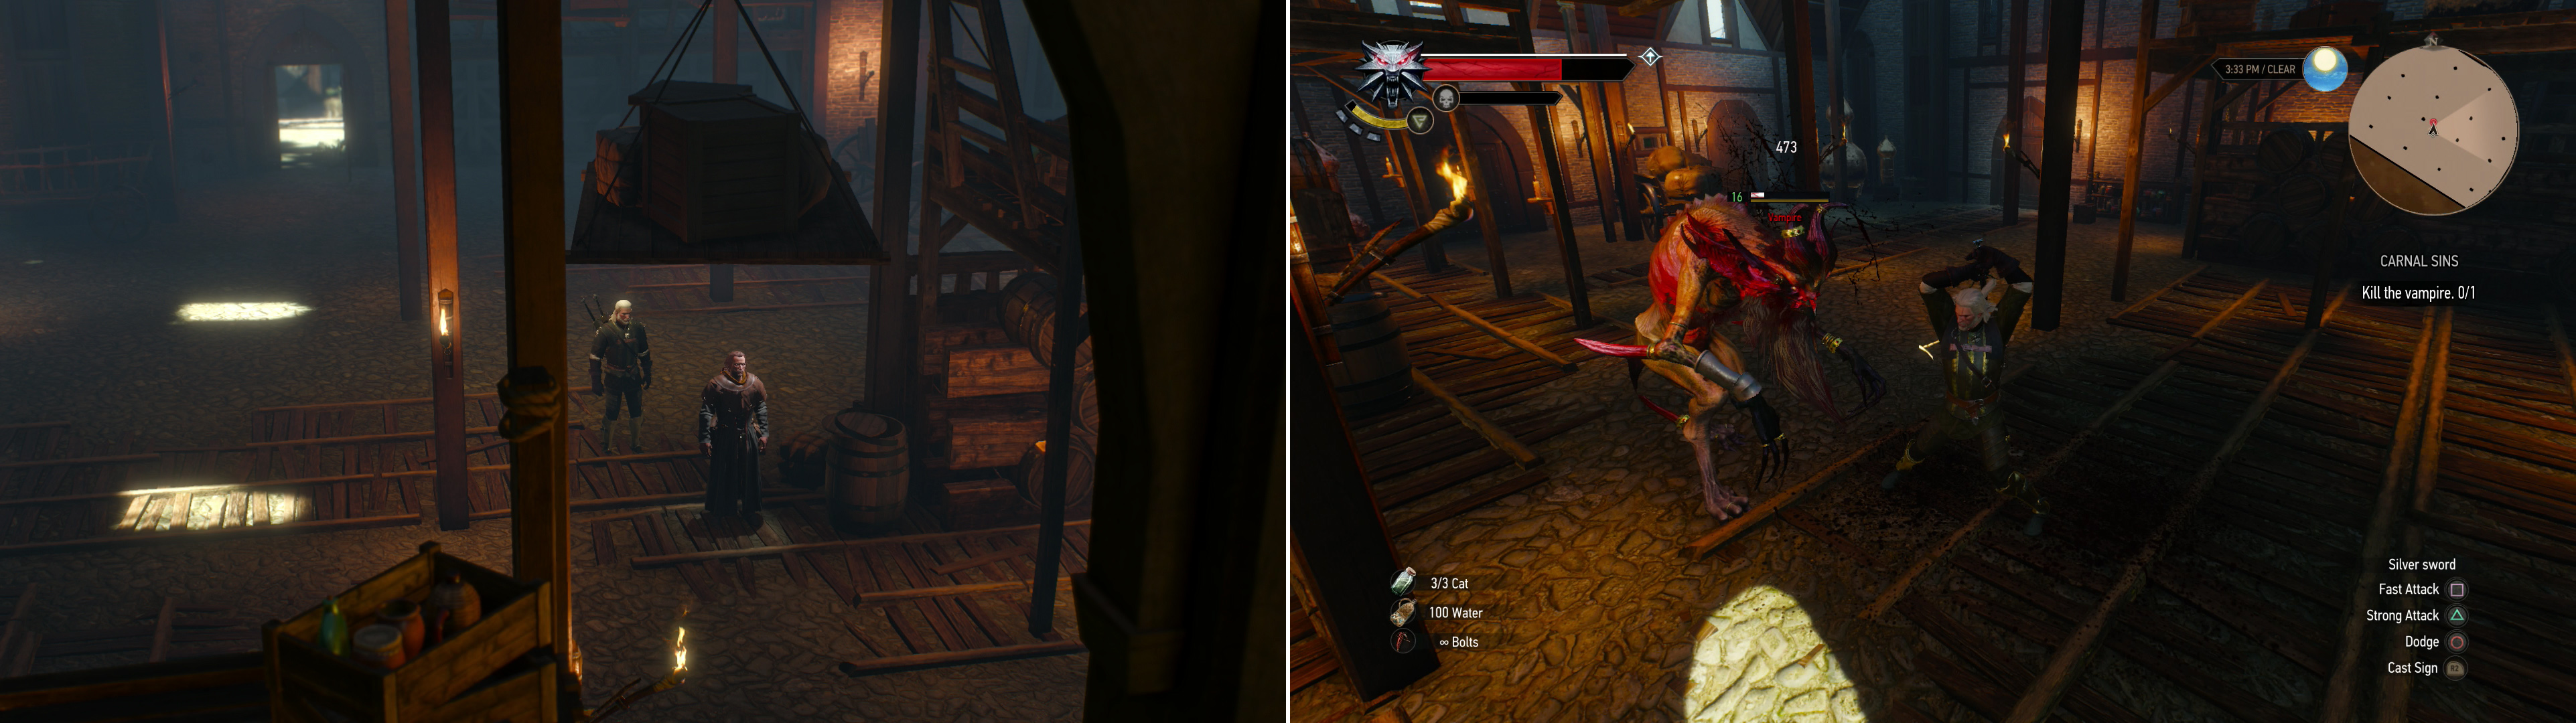 If you learned the truth, you’ll be able to track Hubert down in a dockside warehouse (left). After some monolouging, he’ll reveal his true form-that of a High Vampire-and attack (right).